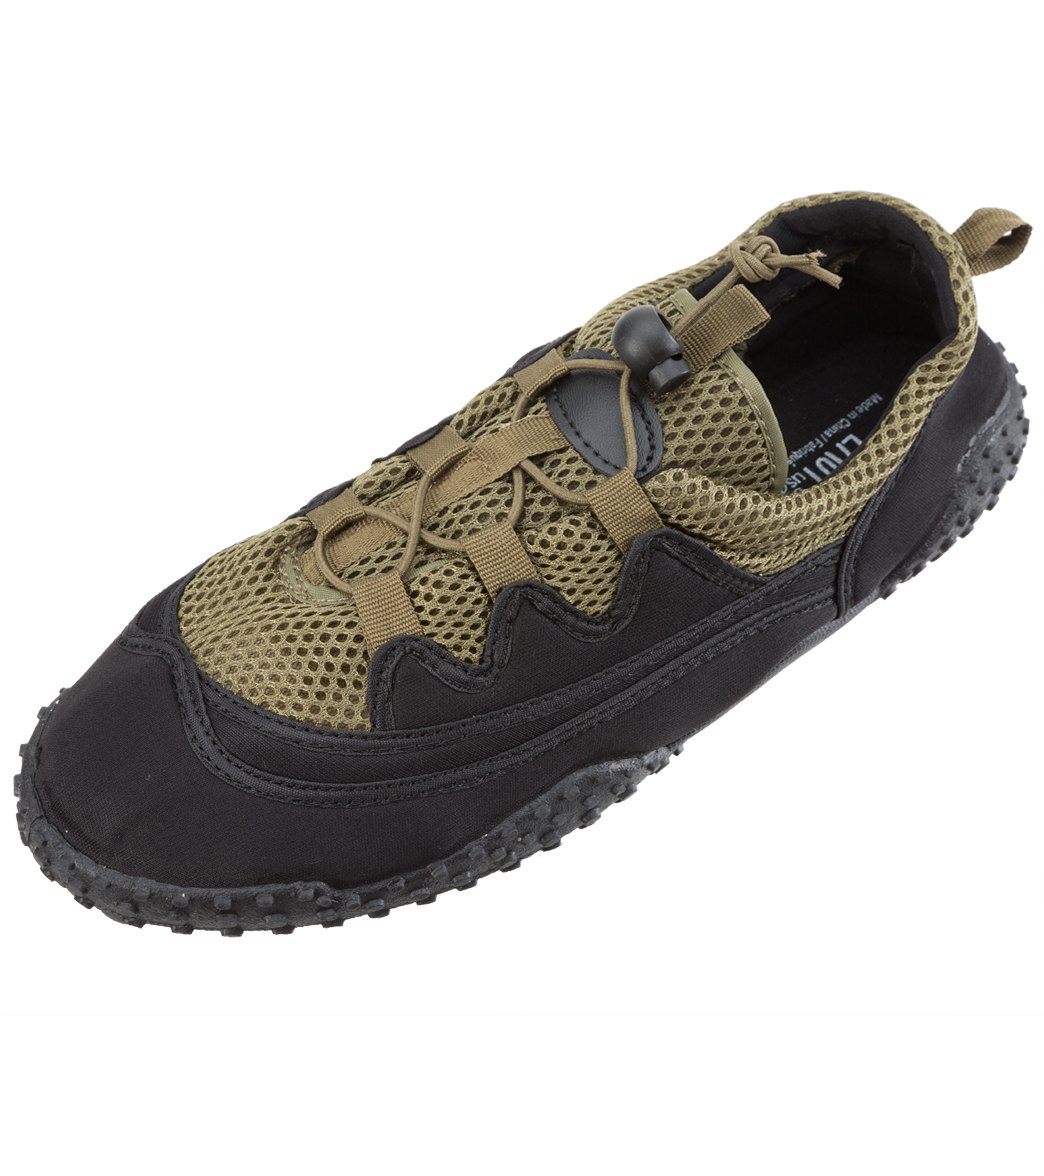 Easy USA Men's Laced Water Shoe at 